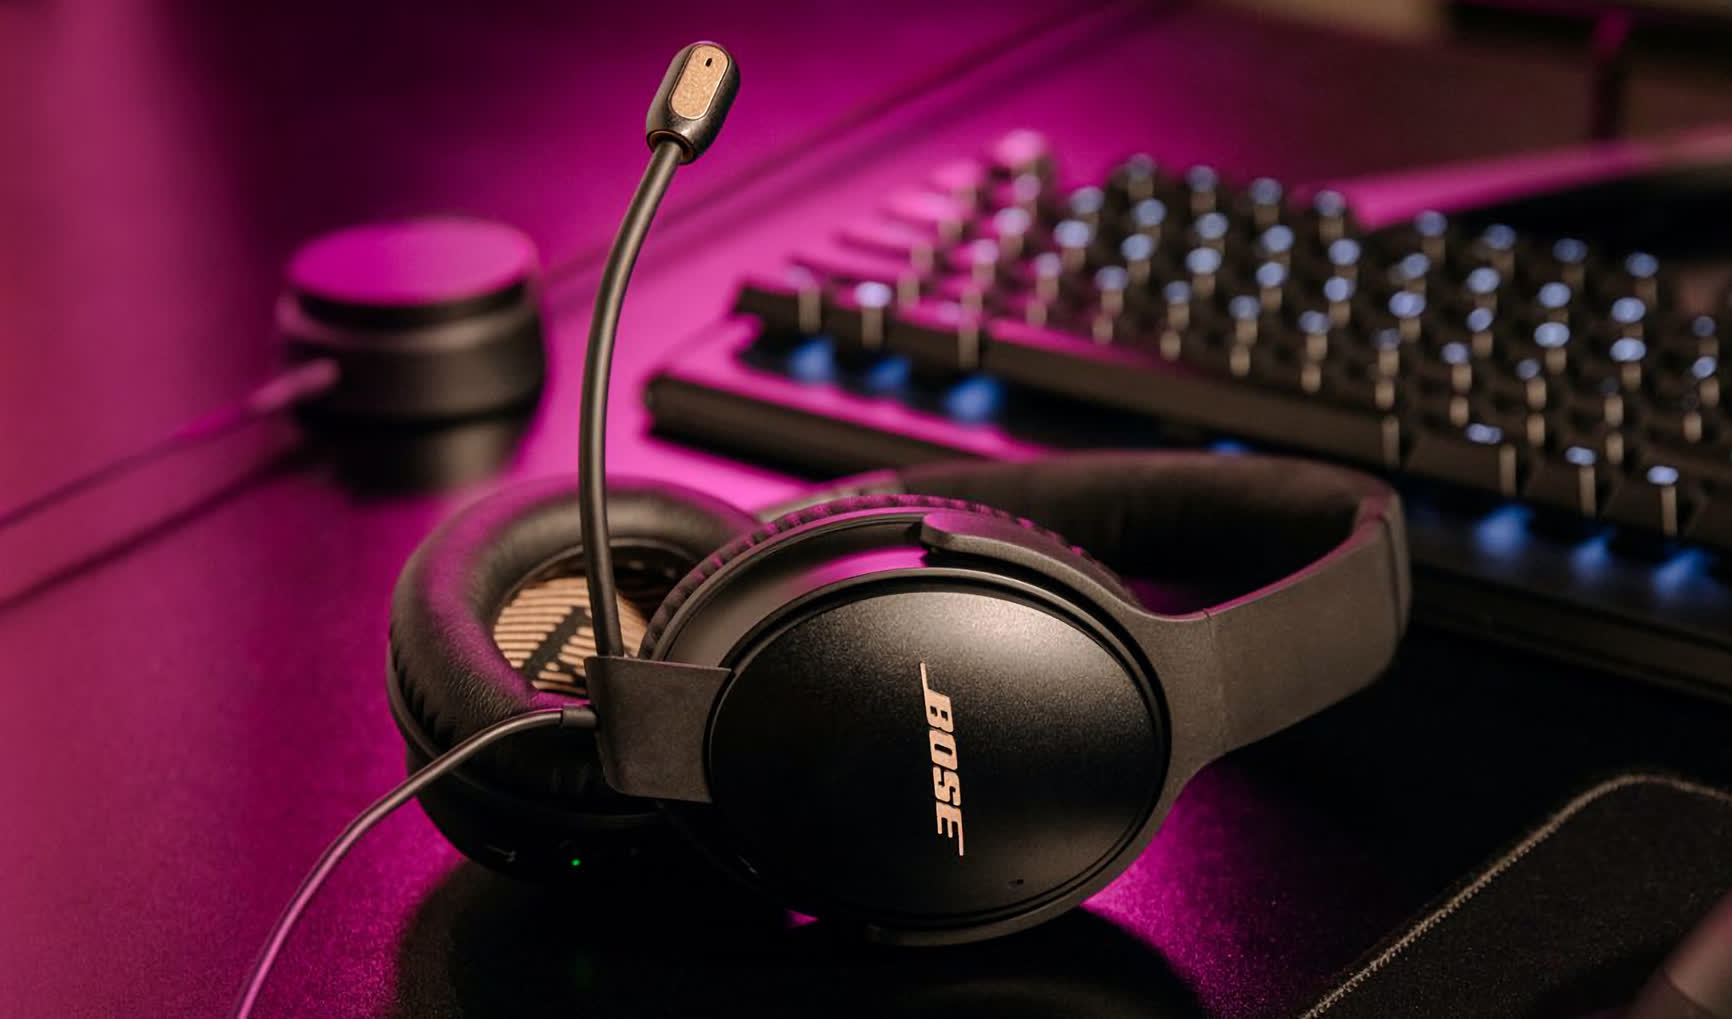 Bose is now offering its QC 35 II headphones as a gaming headset